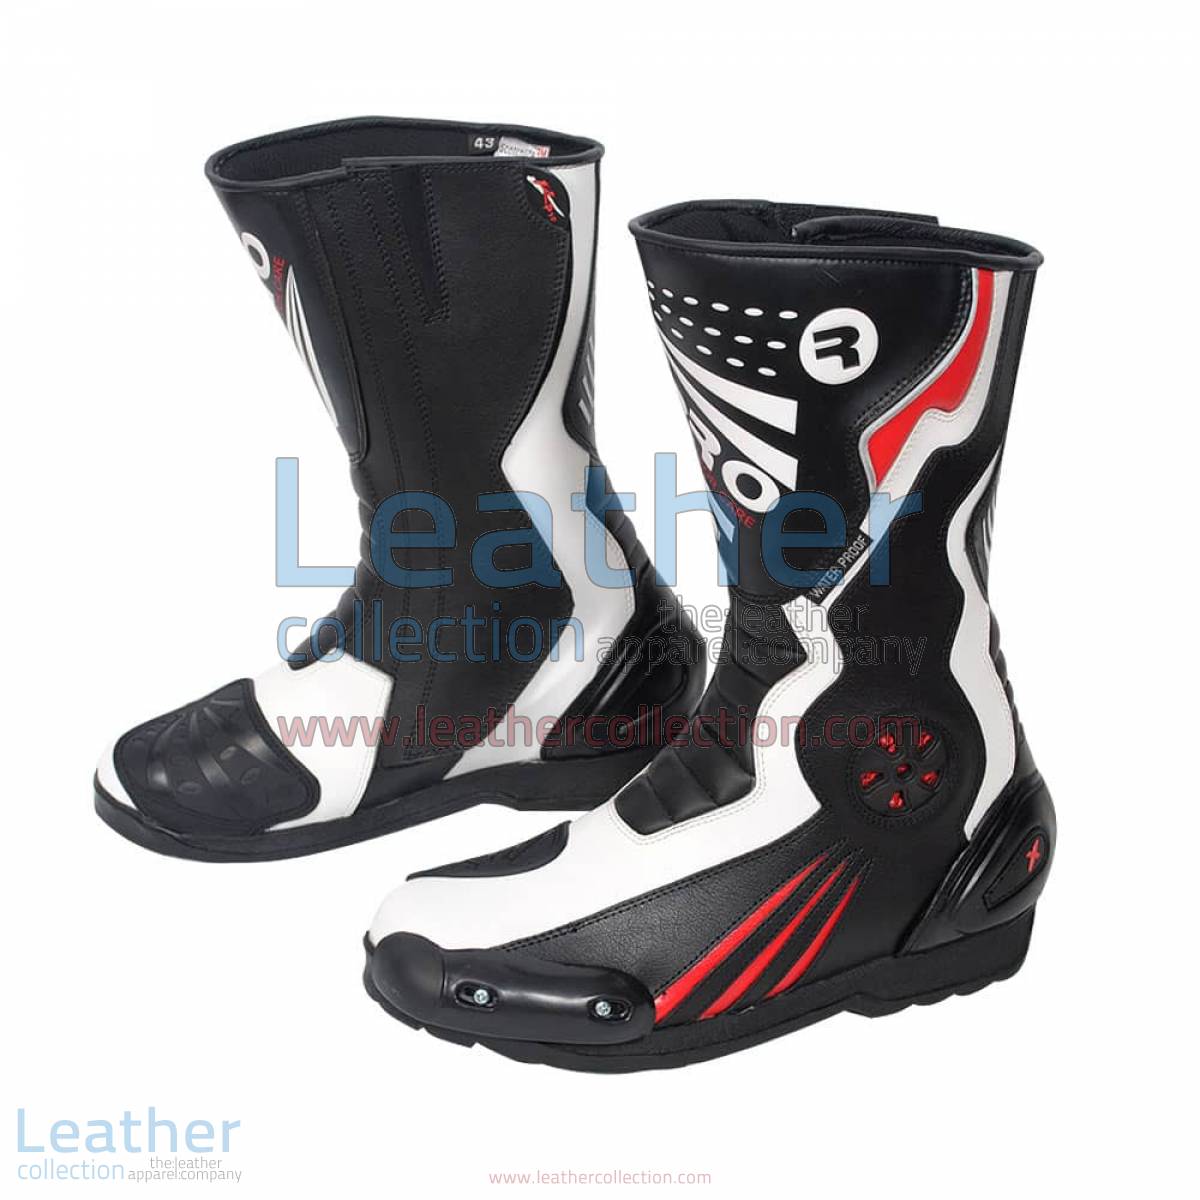 Scorpio Motorbike Riding Boots | motorcycle riding boots